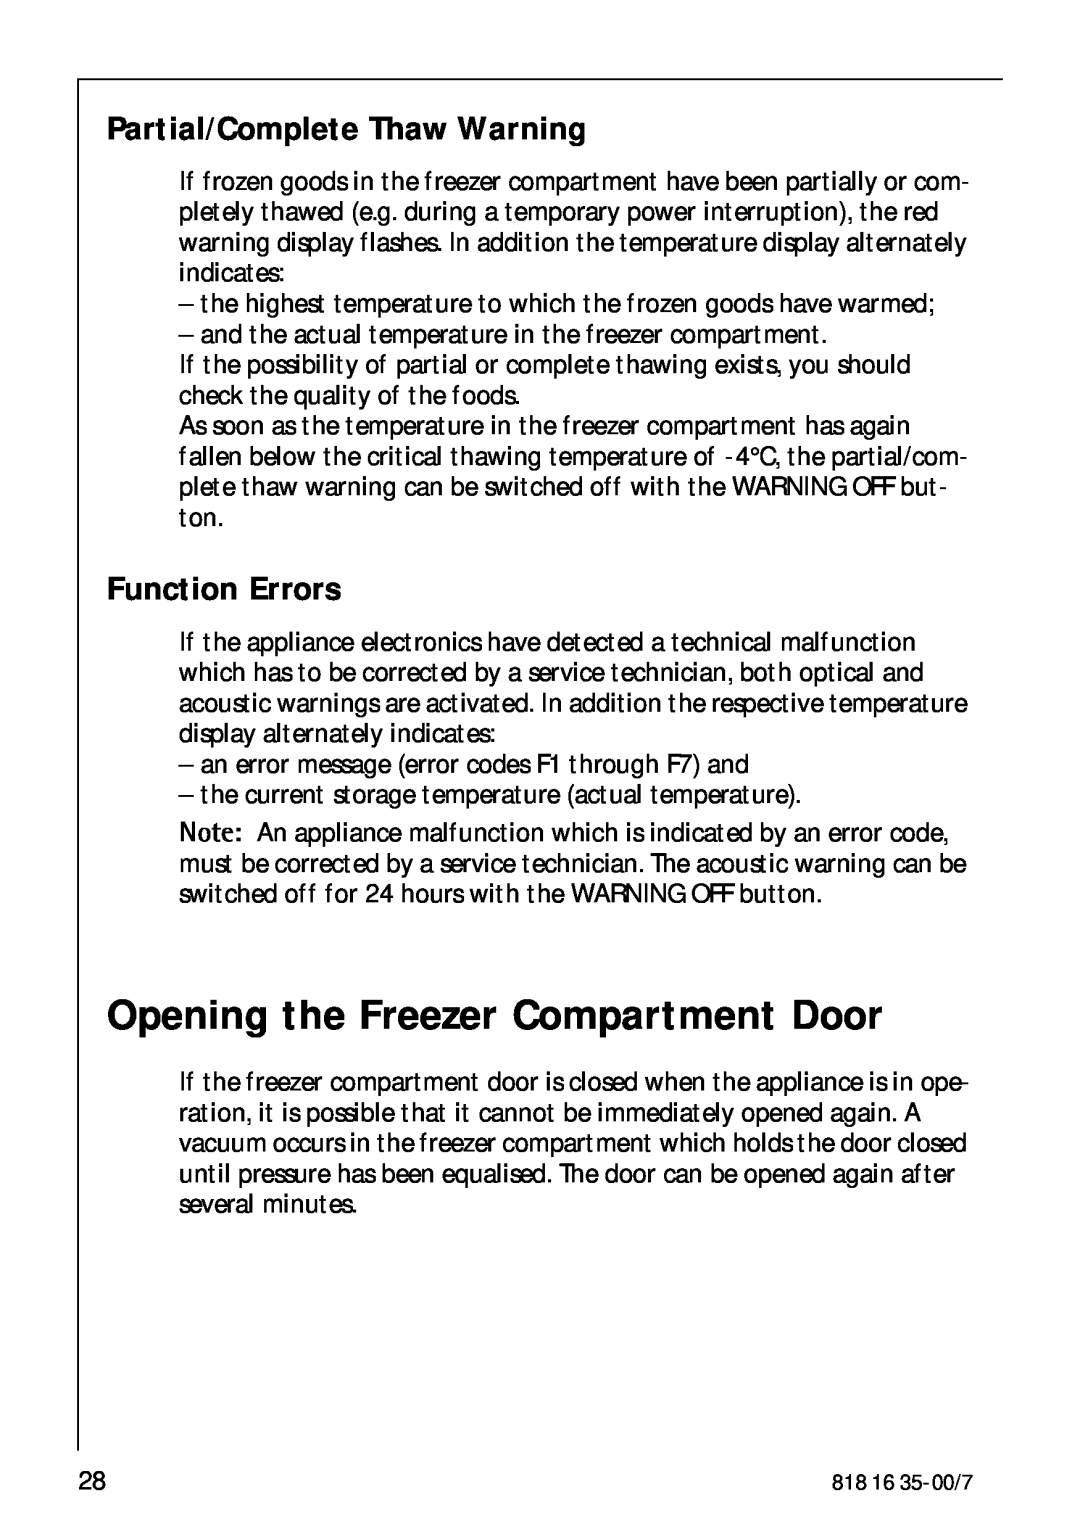 Electrolux KO_SANTO 4085 Opening the Freezer Compartment Door, Partial/Complete Thaw Warning, Function Errors 